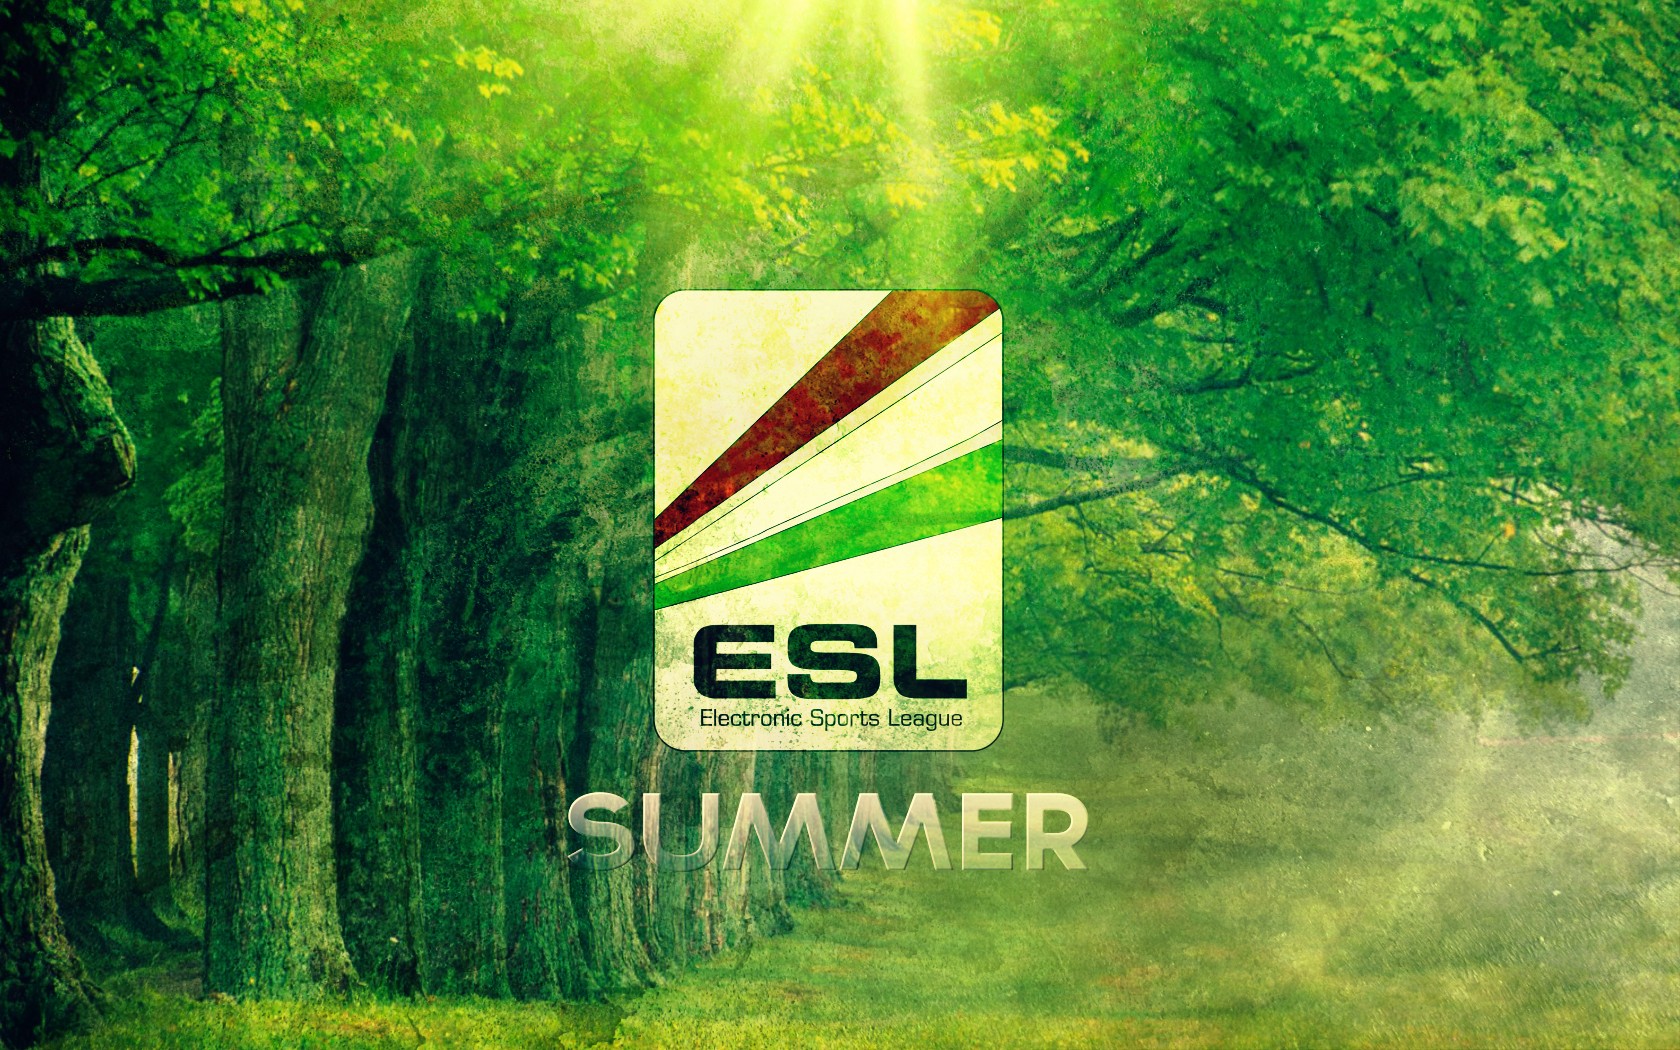 General 1680x1050 Electronic Sports League summer PC gaming logo